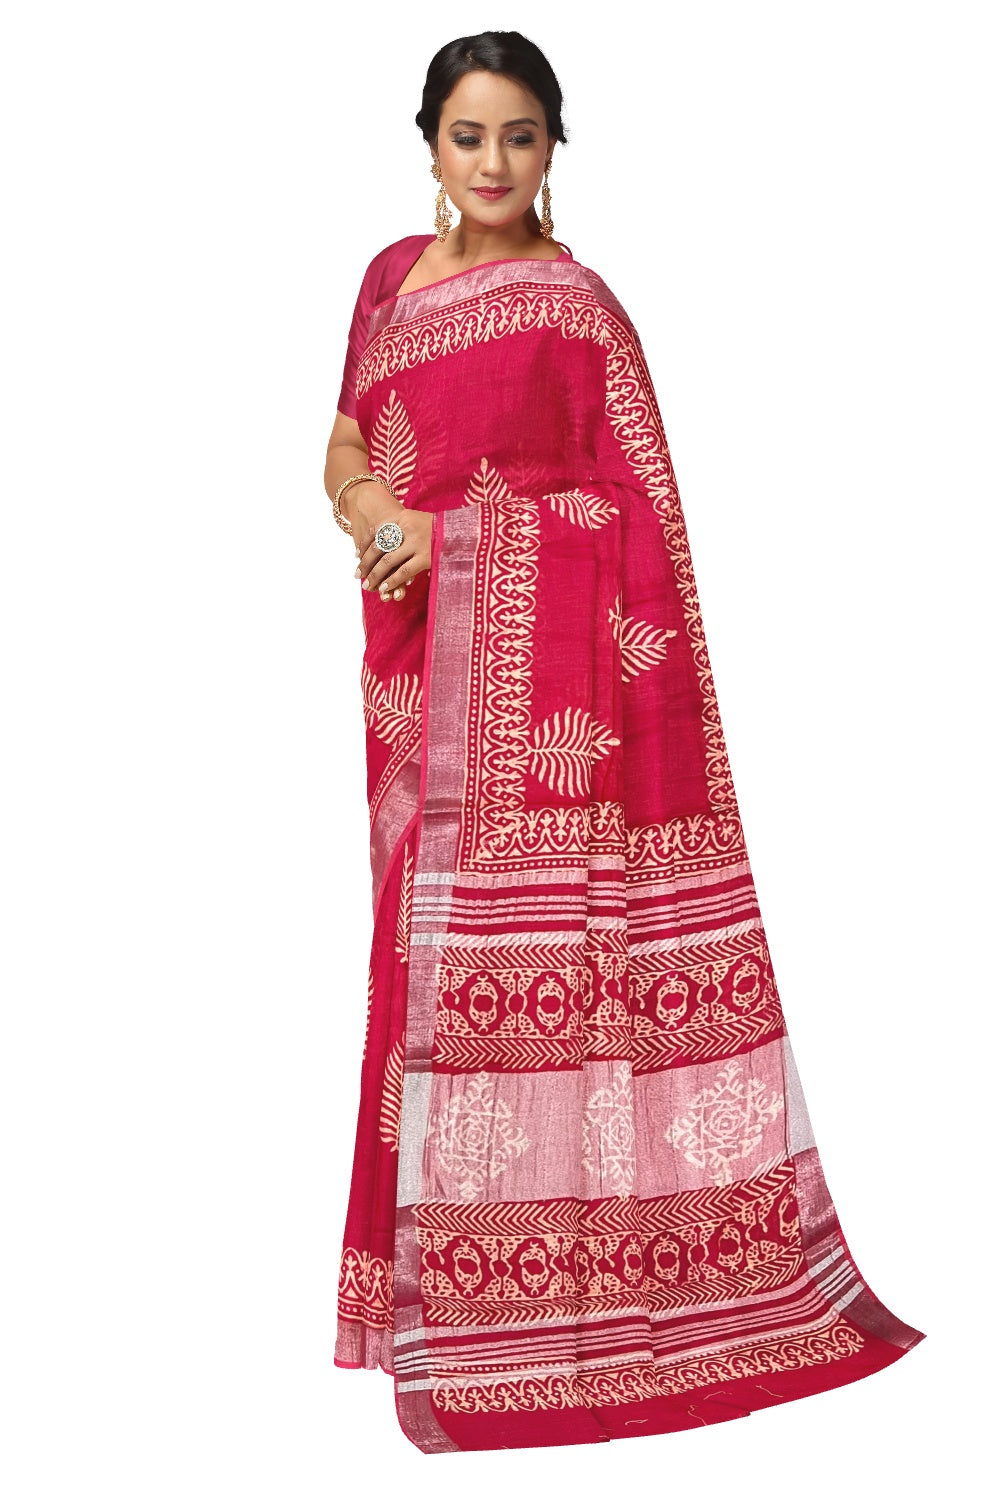 Southloom Linen Pinkish Red Designer Saree with White Prints and Tassels on Pallu